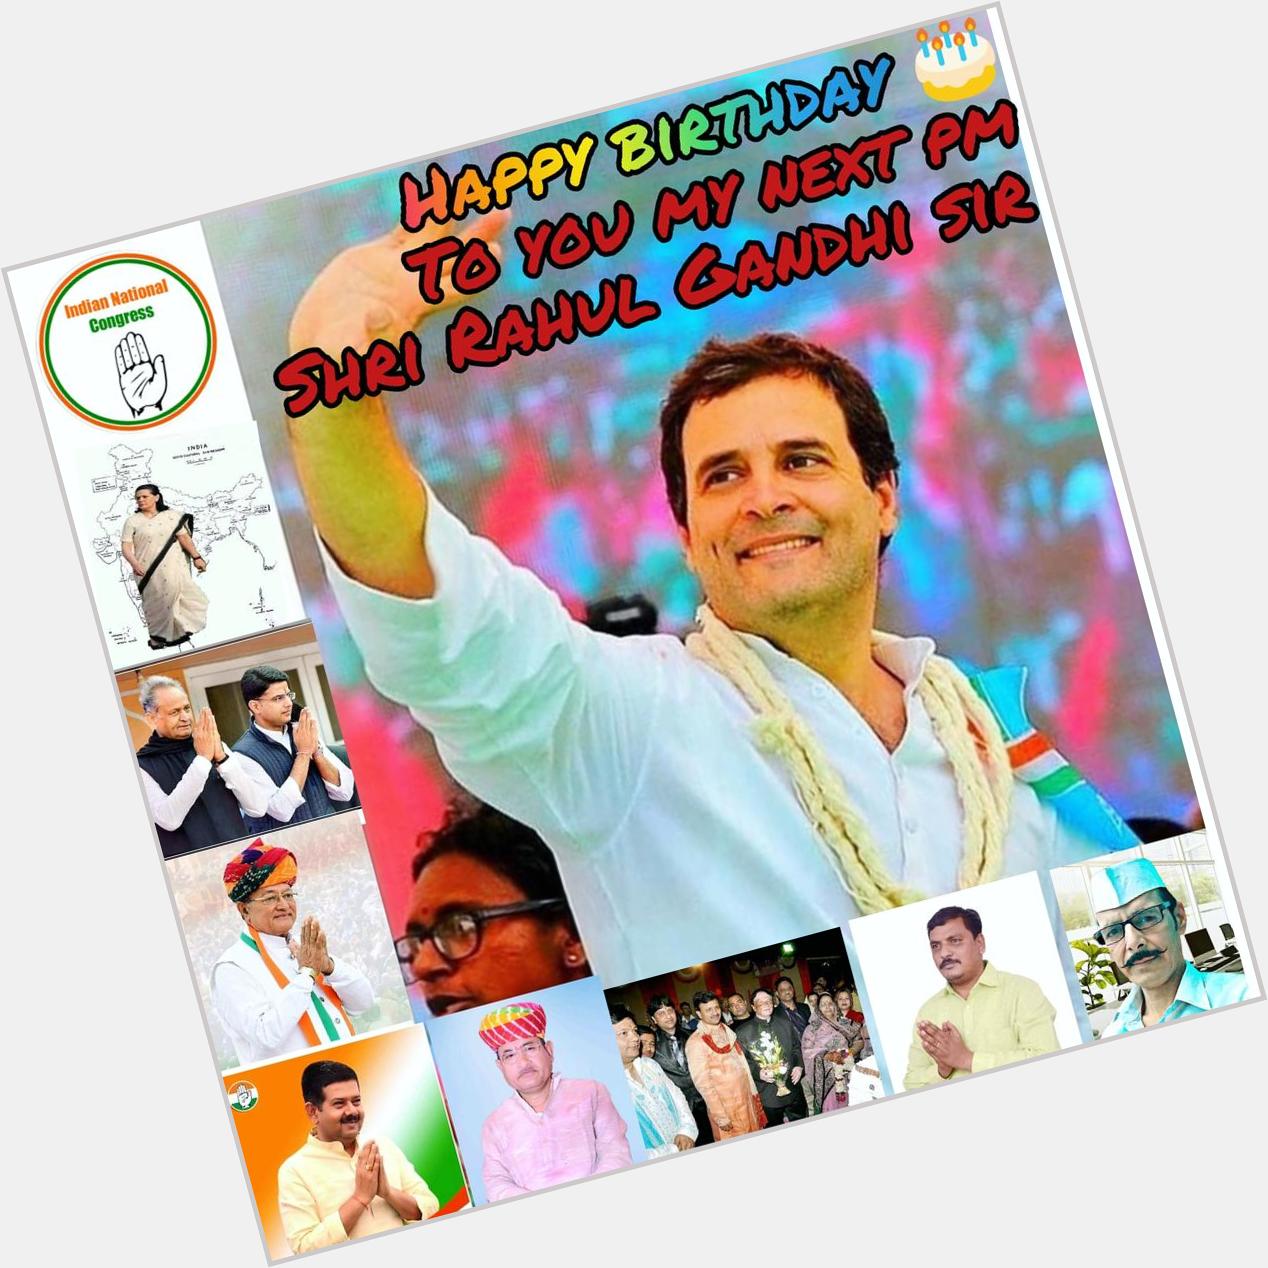 Congress party leader and next Indian pm Shri Rahul Gandhi Ji
Happy birthday to you sir  